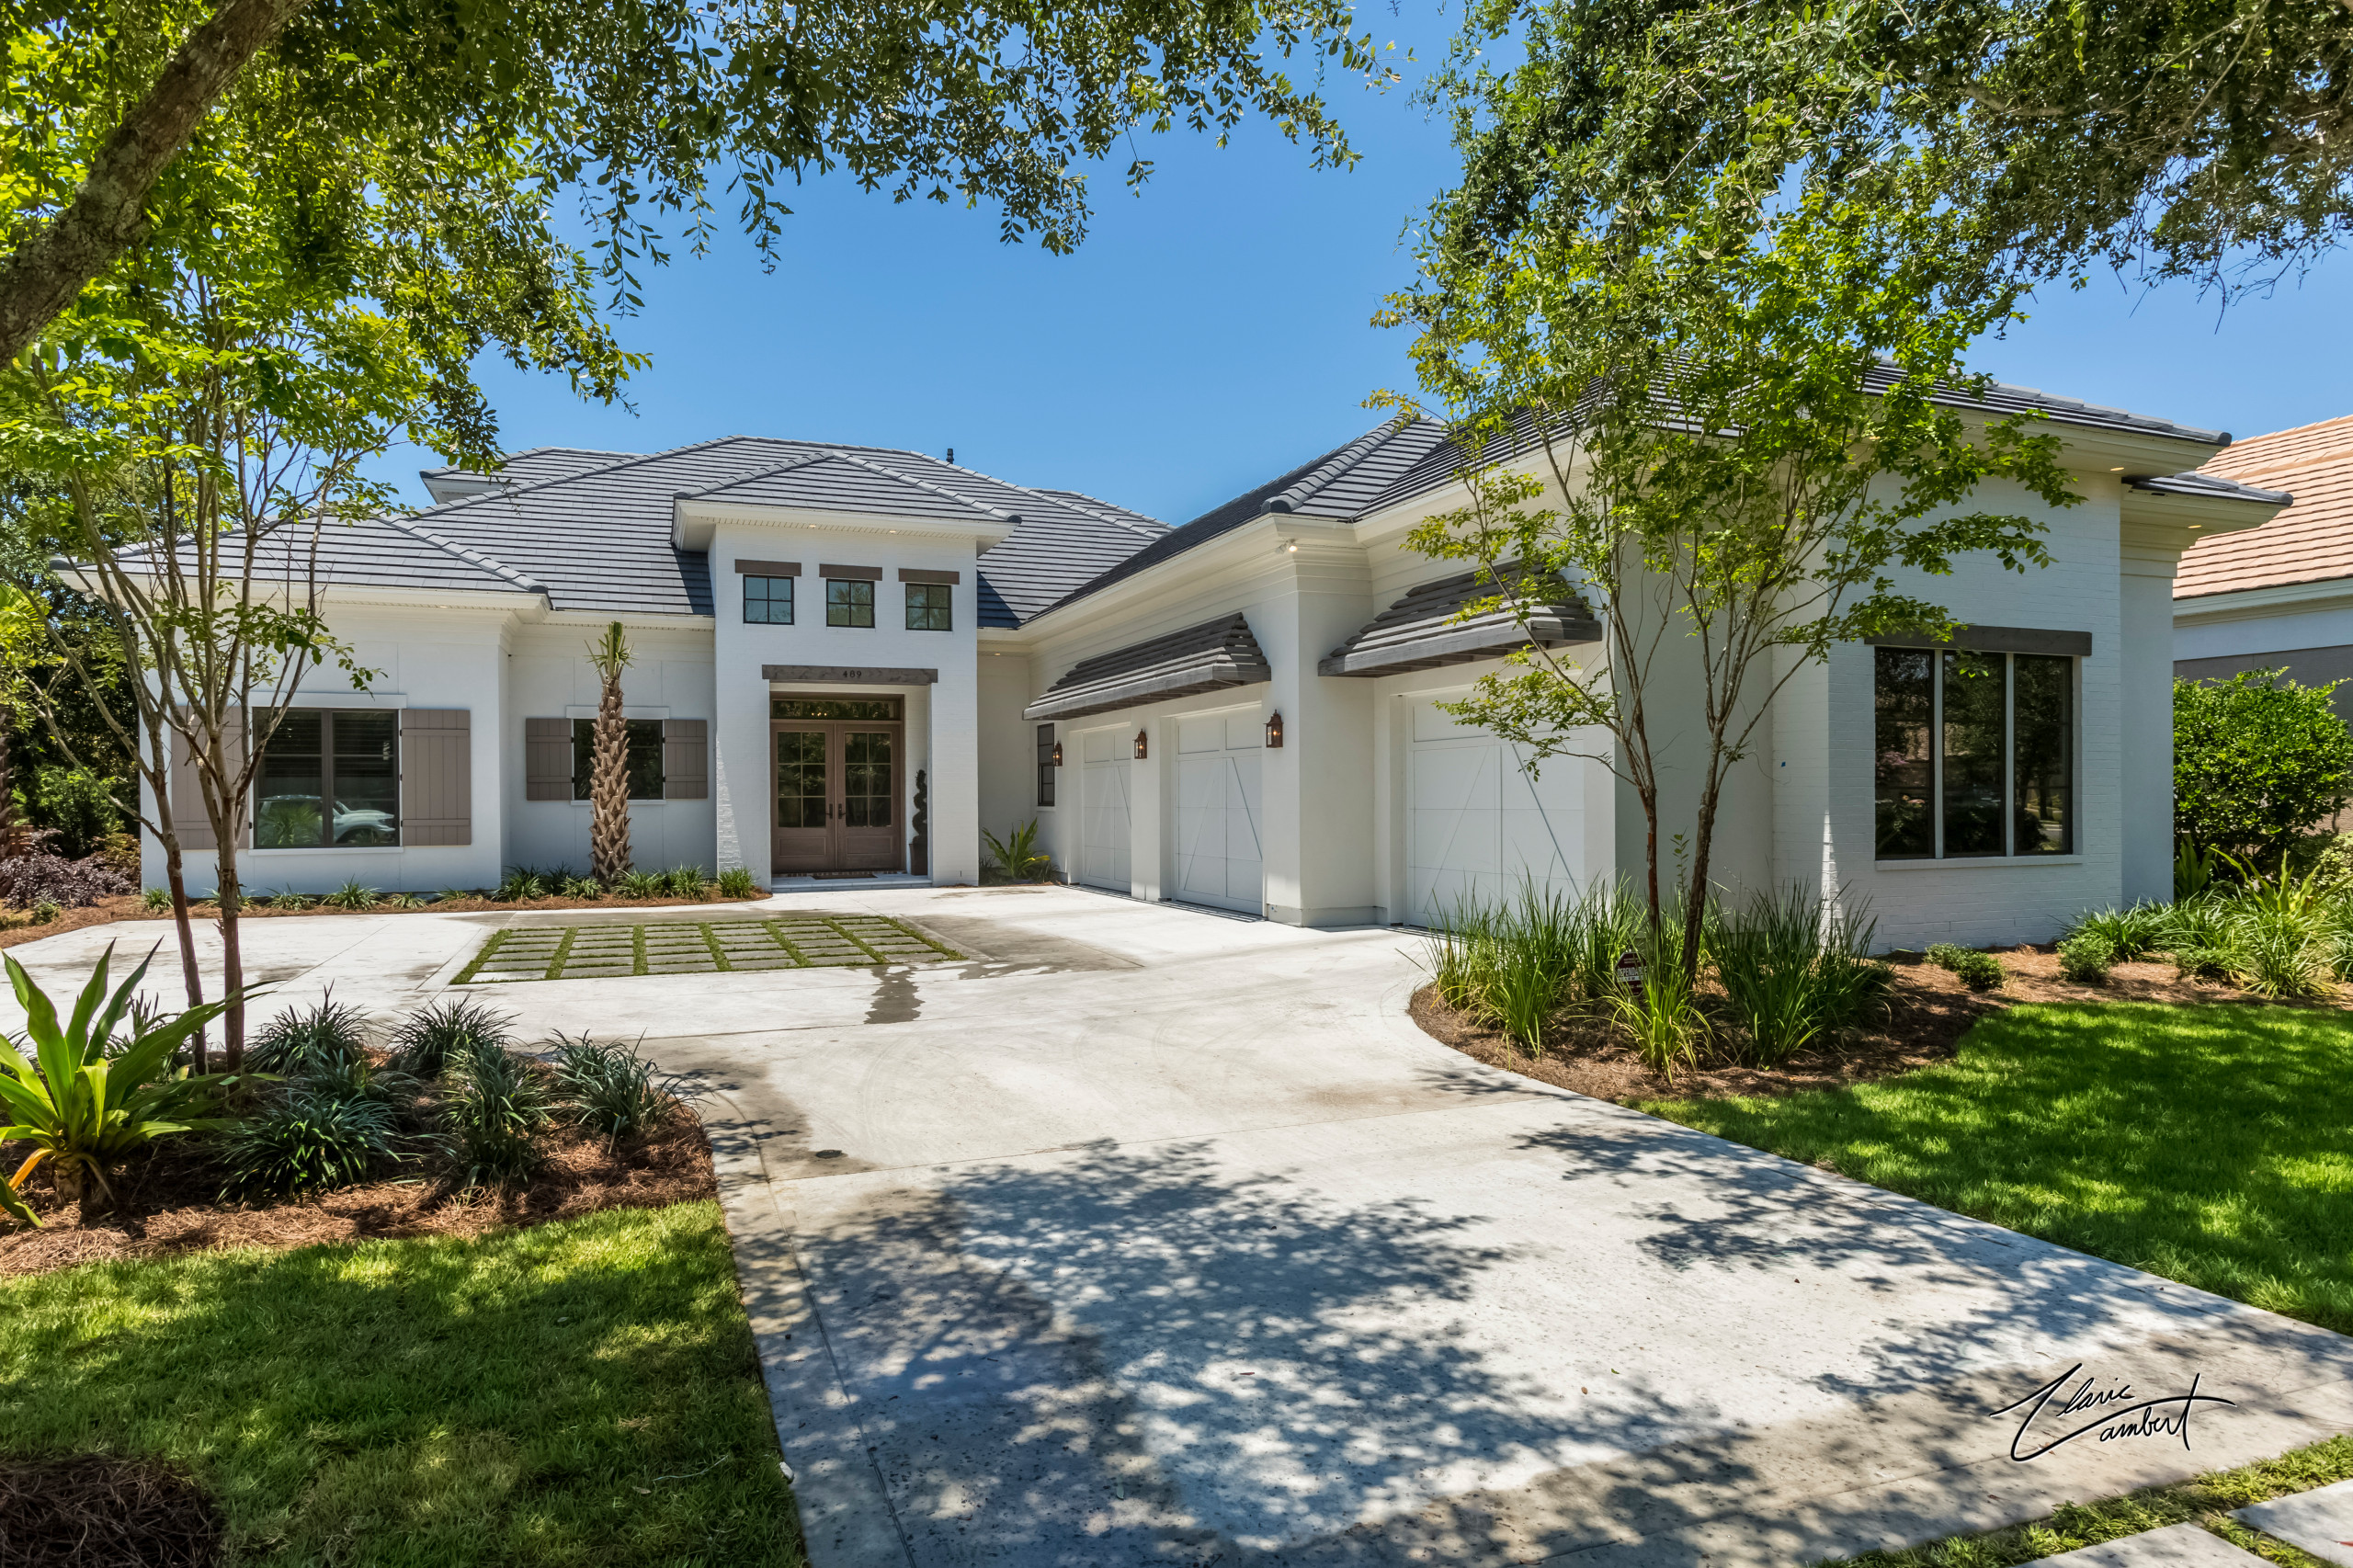 Beautiful Golf Course/Lakefront home in Regatta Bay Golf and Yacht Club